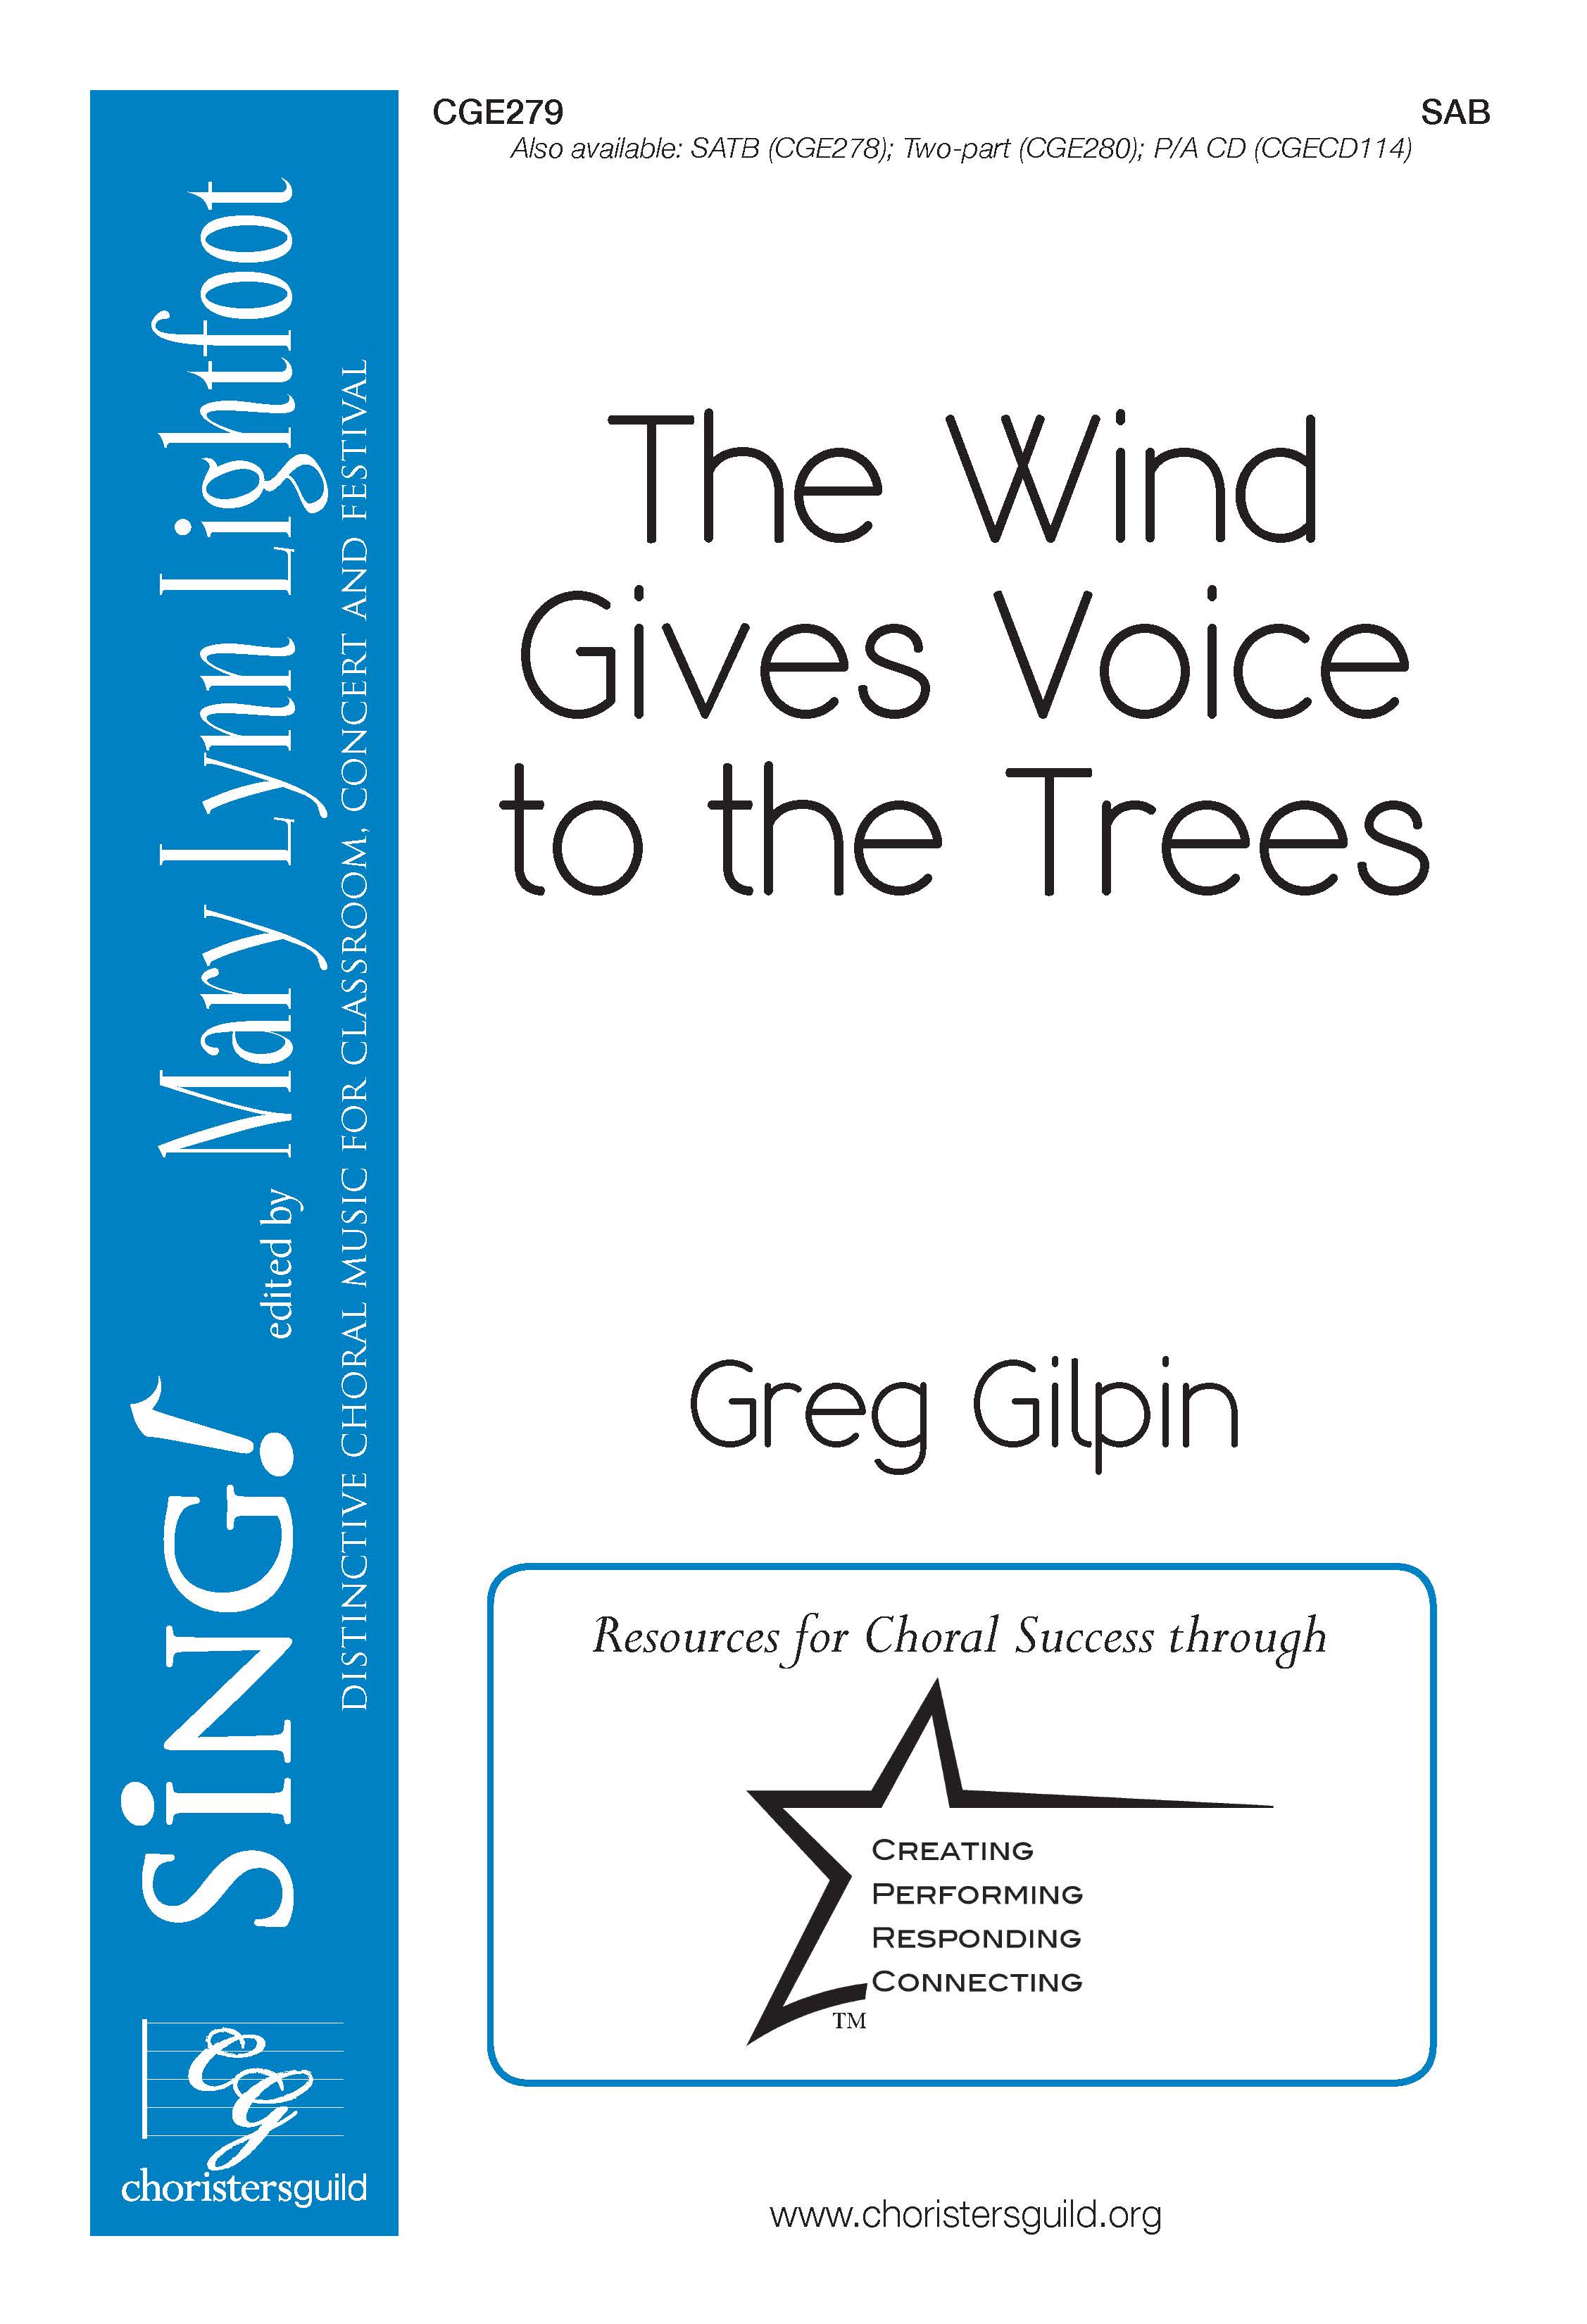 The Wind Gives Voice to the Trees - SAB